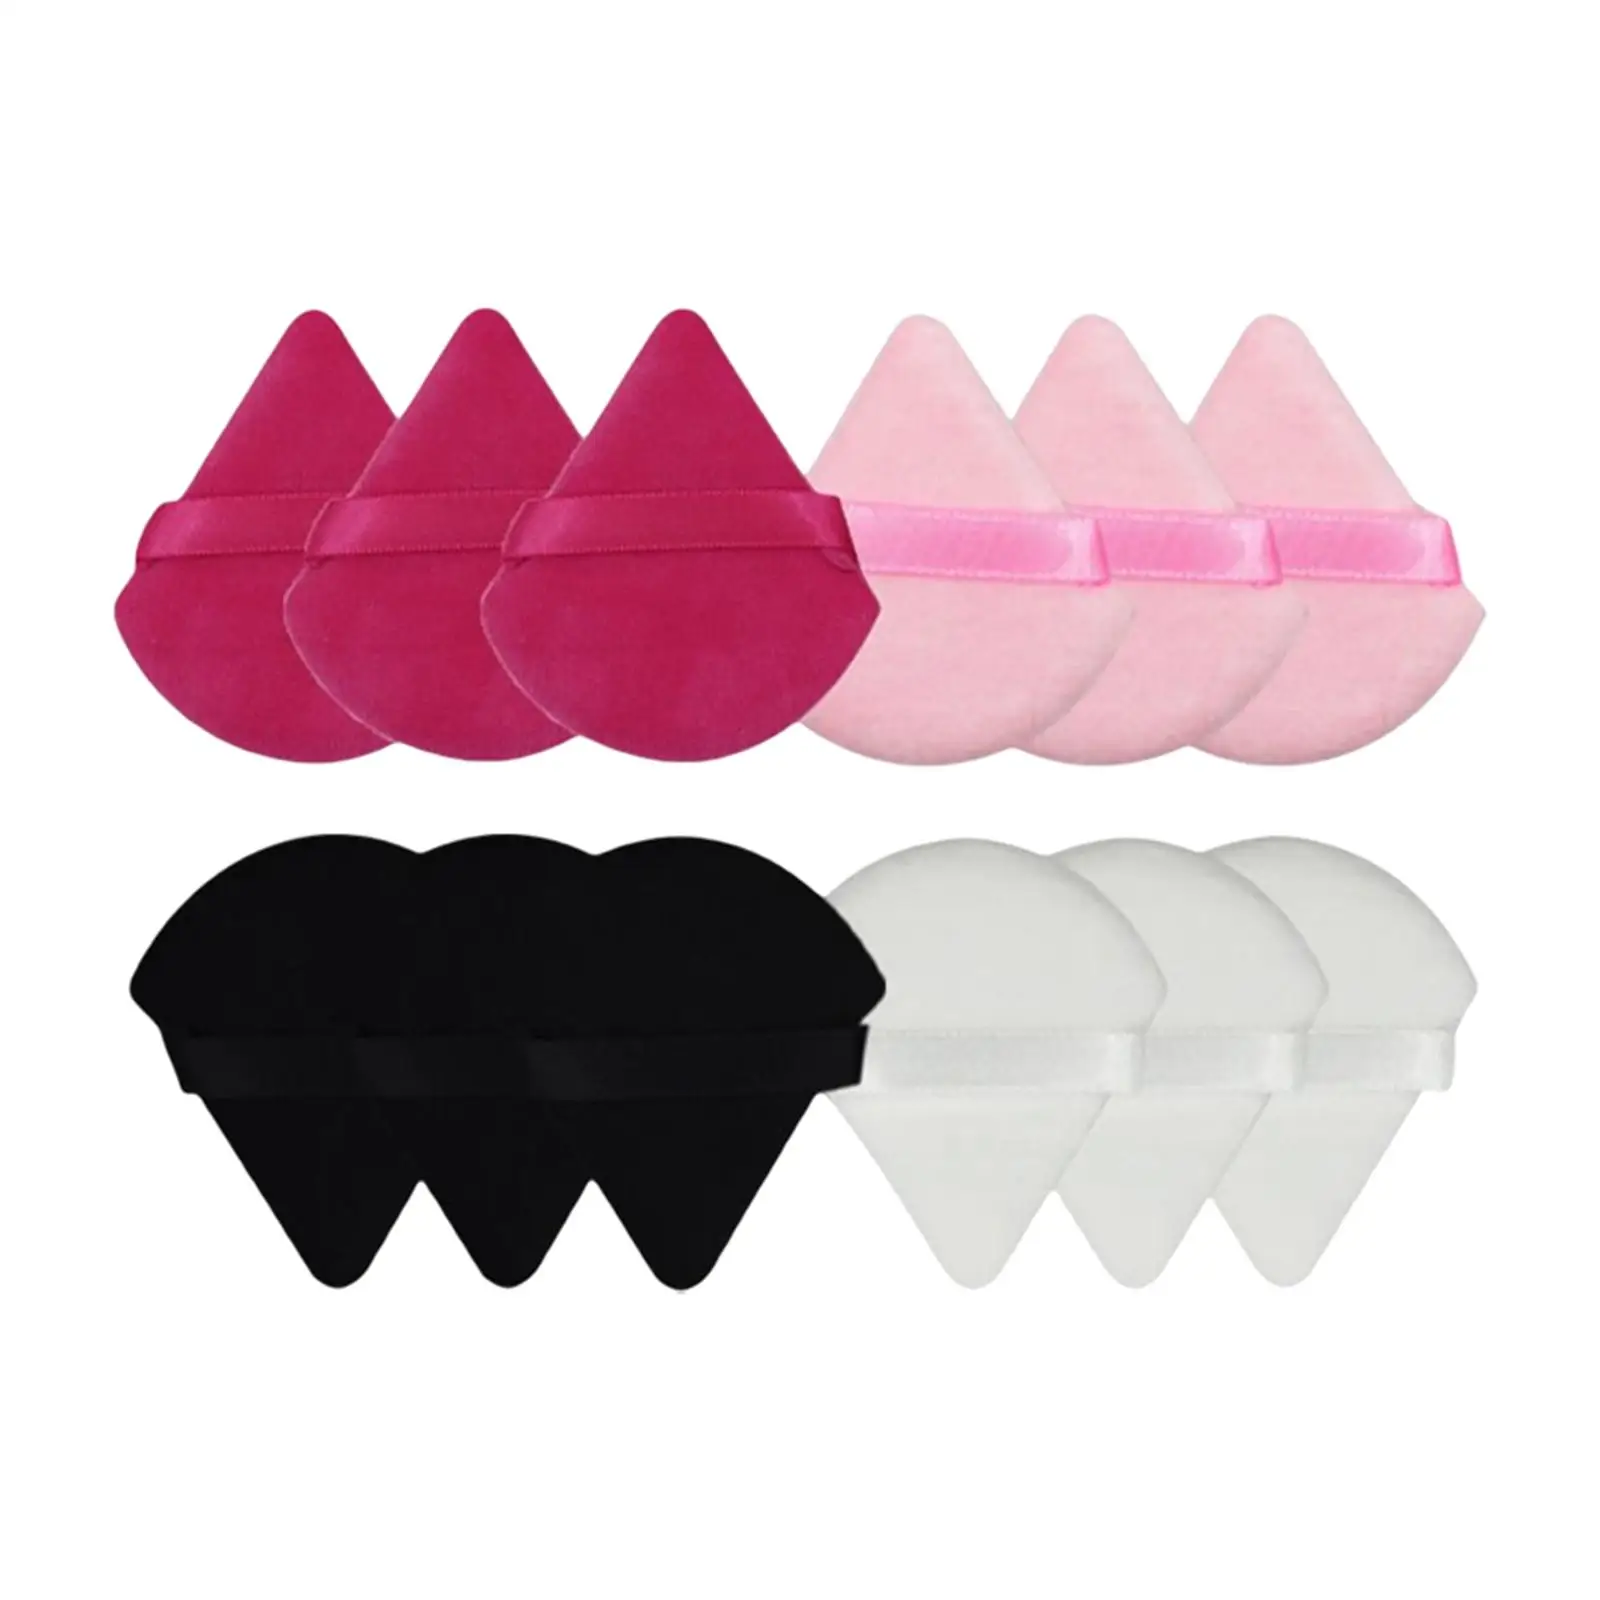 12 Pcs Triangle Powder Cosmetic Tool Soft Makeup Puff for Loose Powder Eye Shadow Contouring Under Eyes Corners Foundation